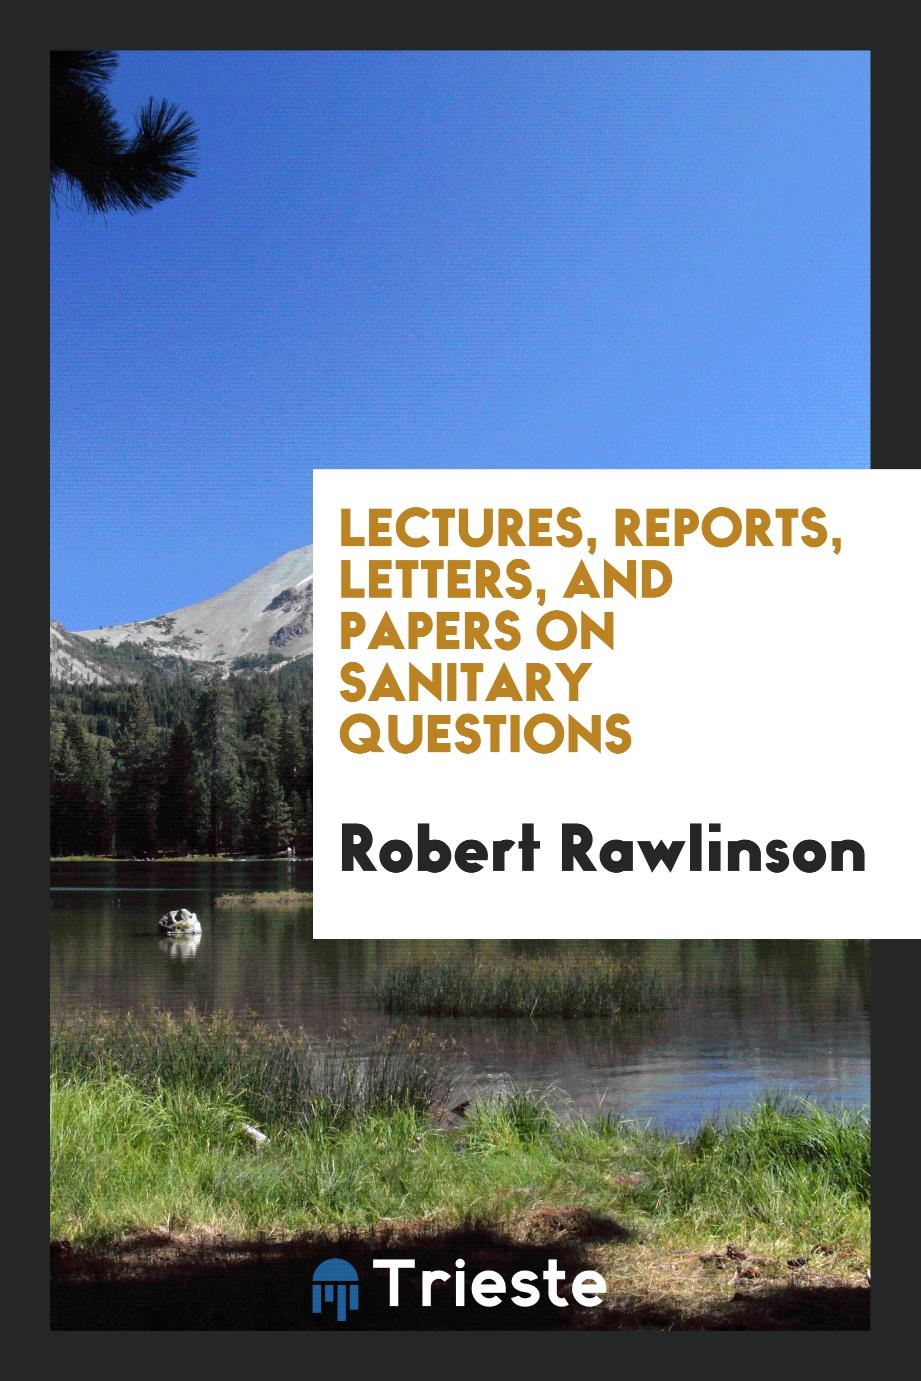 Lectures, Reports, Letters, and Papers on Sanitary Questions